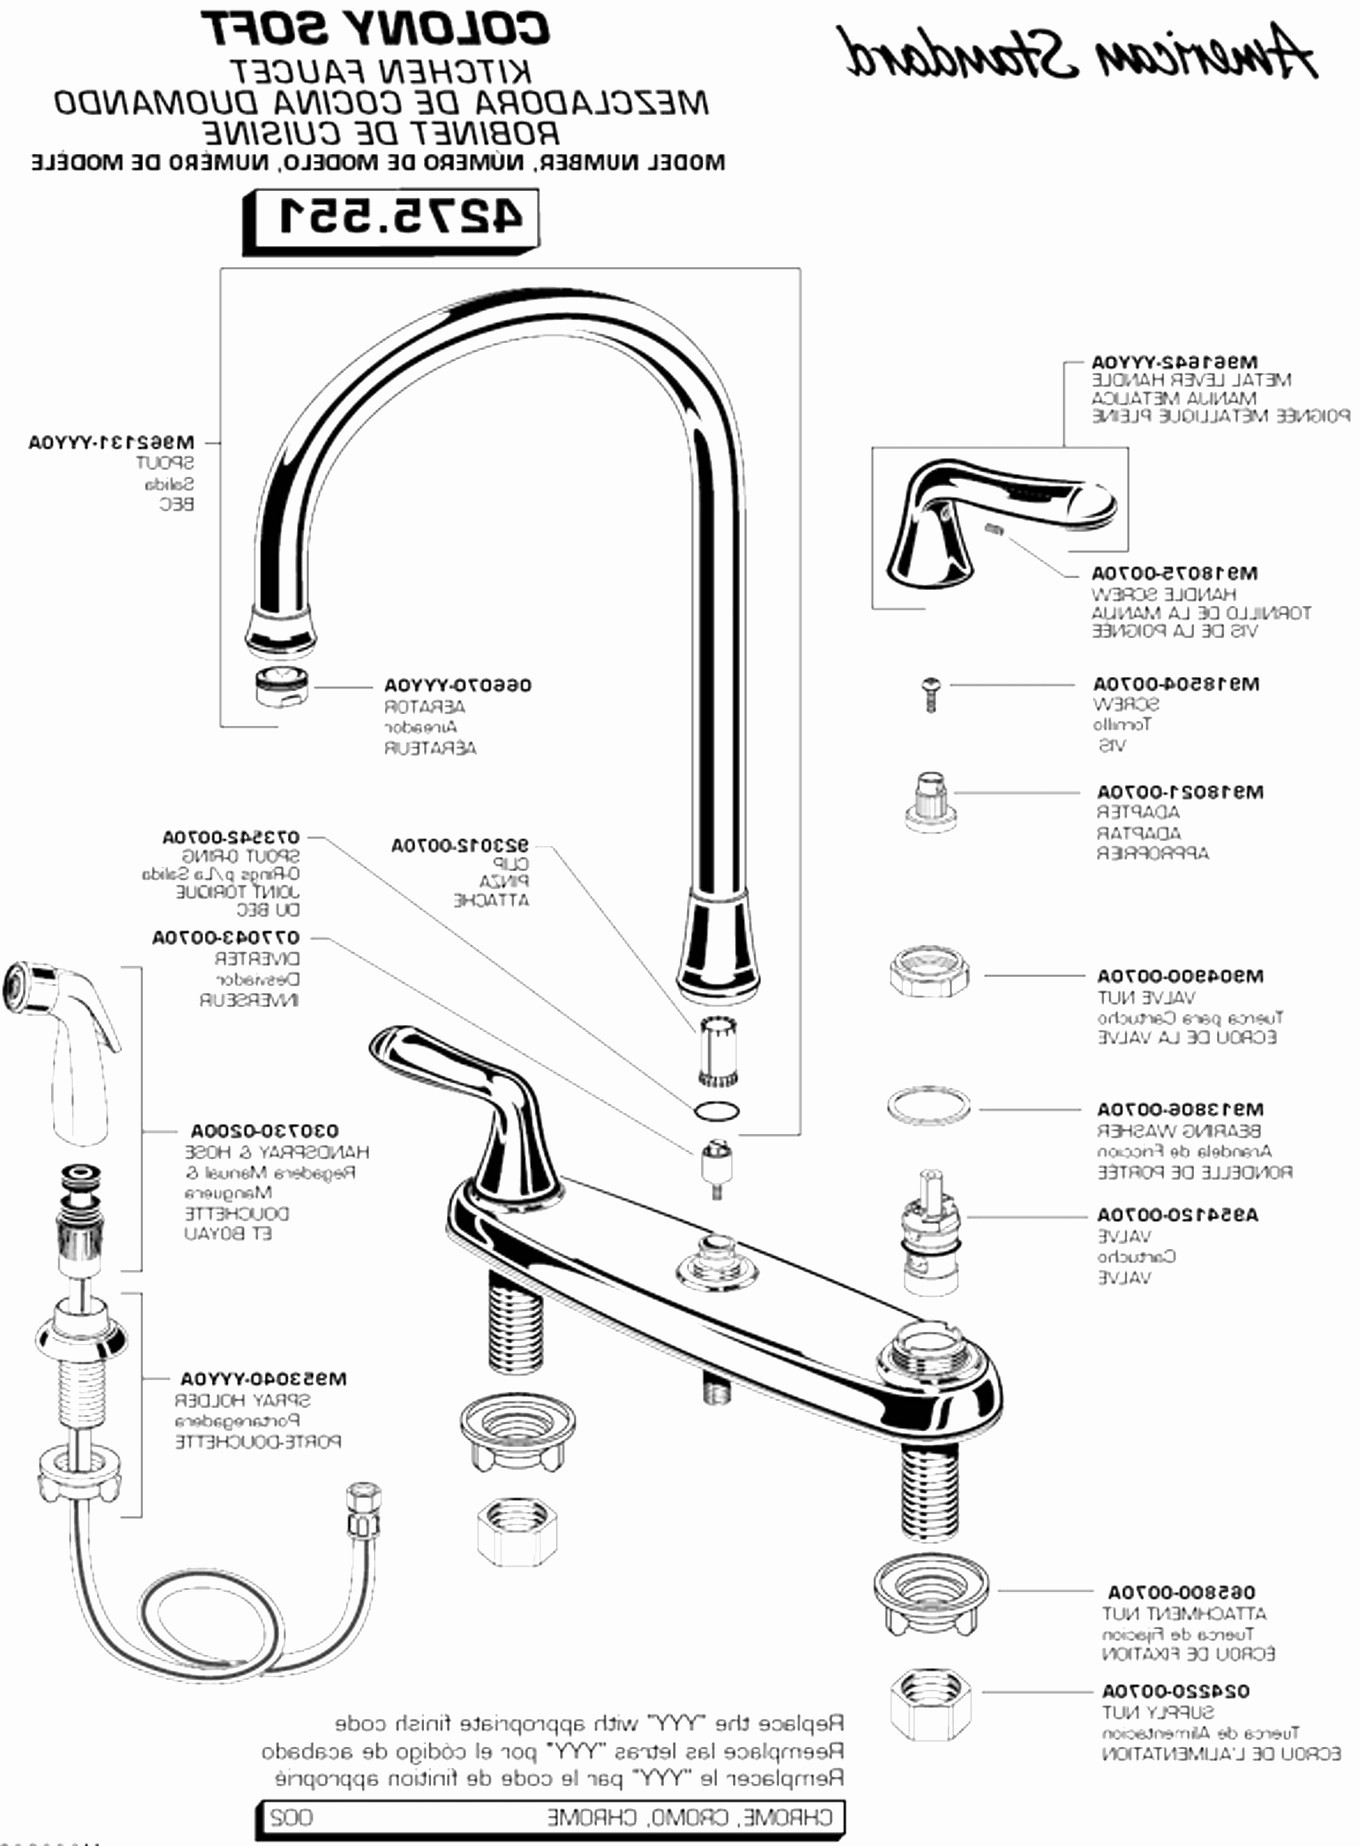 Grohe Faucet Parts Diagram Grohe Kitchen Sink Faucet Replacement Parts Inspirational Grohe Of Grohe Faucet Parts Diagram